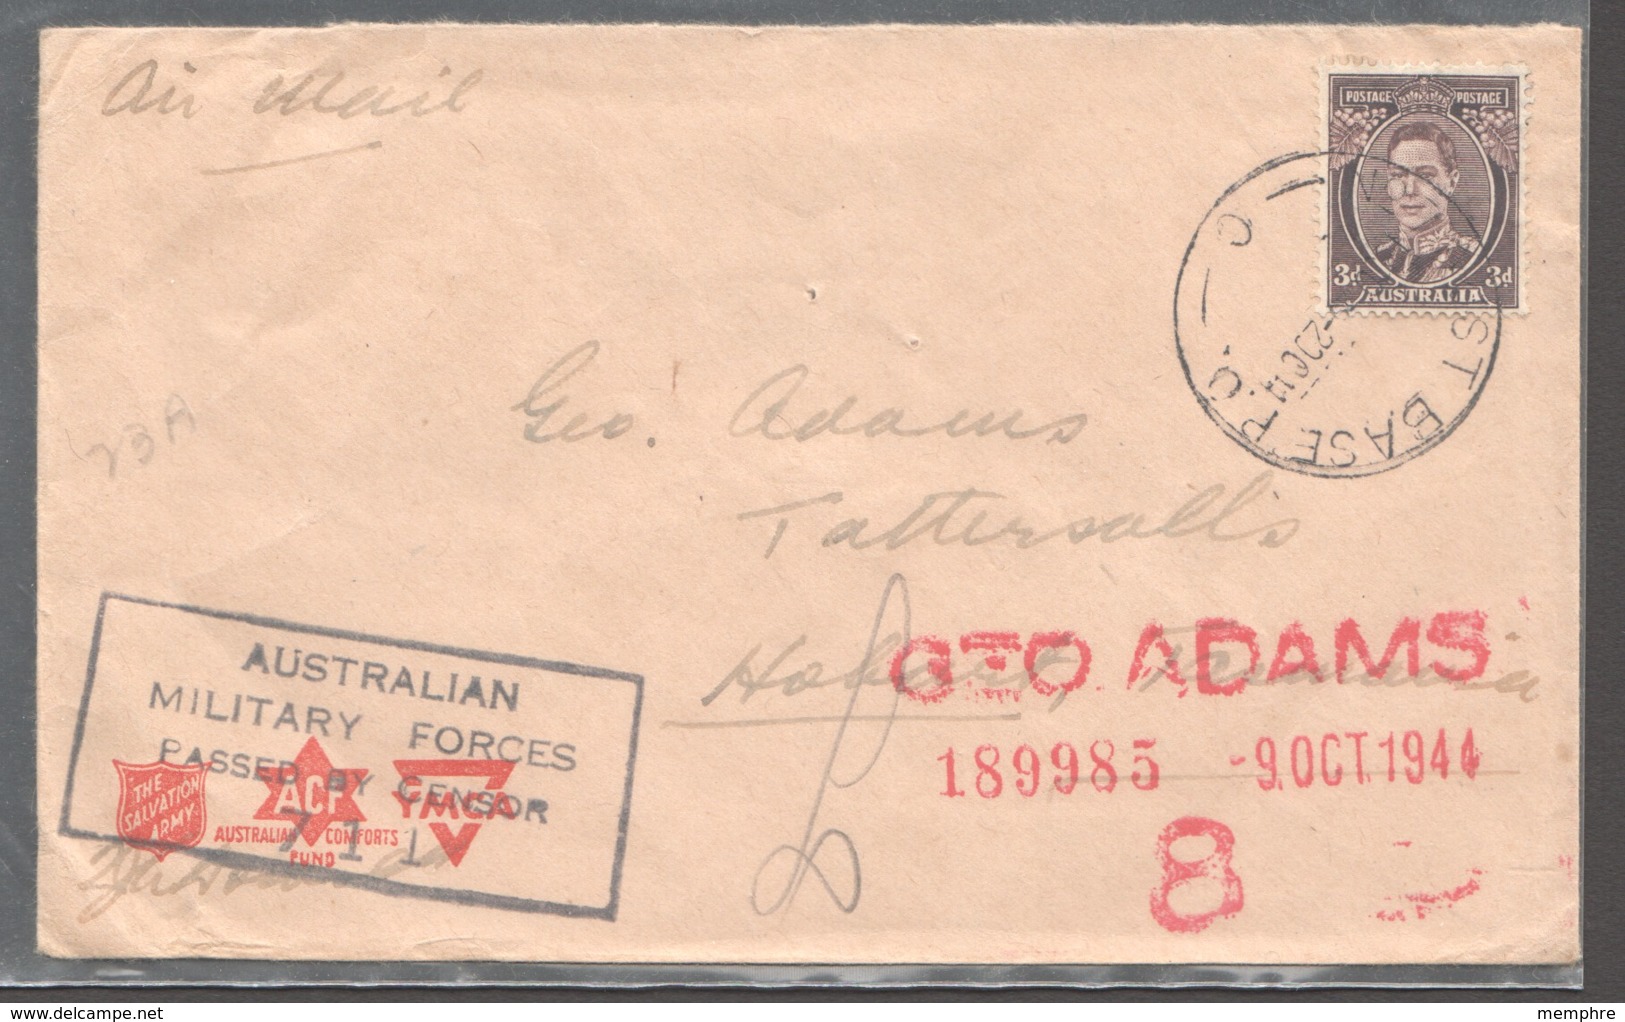 Military Concession Air Mail - No 7 Australian Base (Port Moresby PNG) - Tattersall's Censored - Covers & Documents